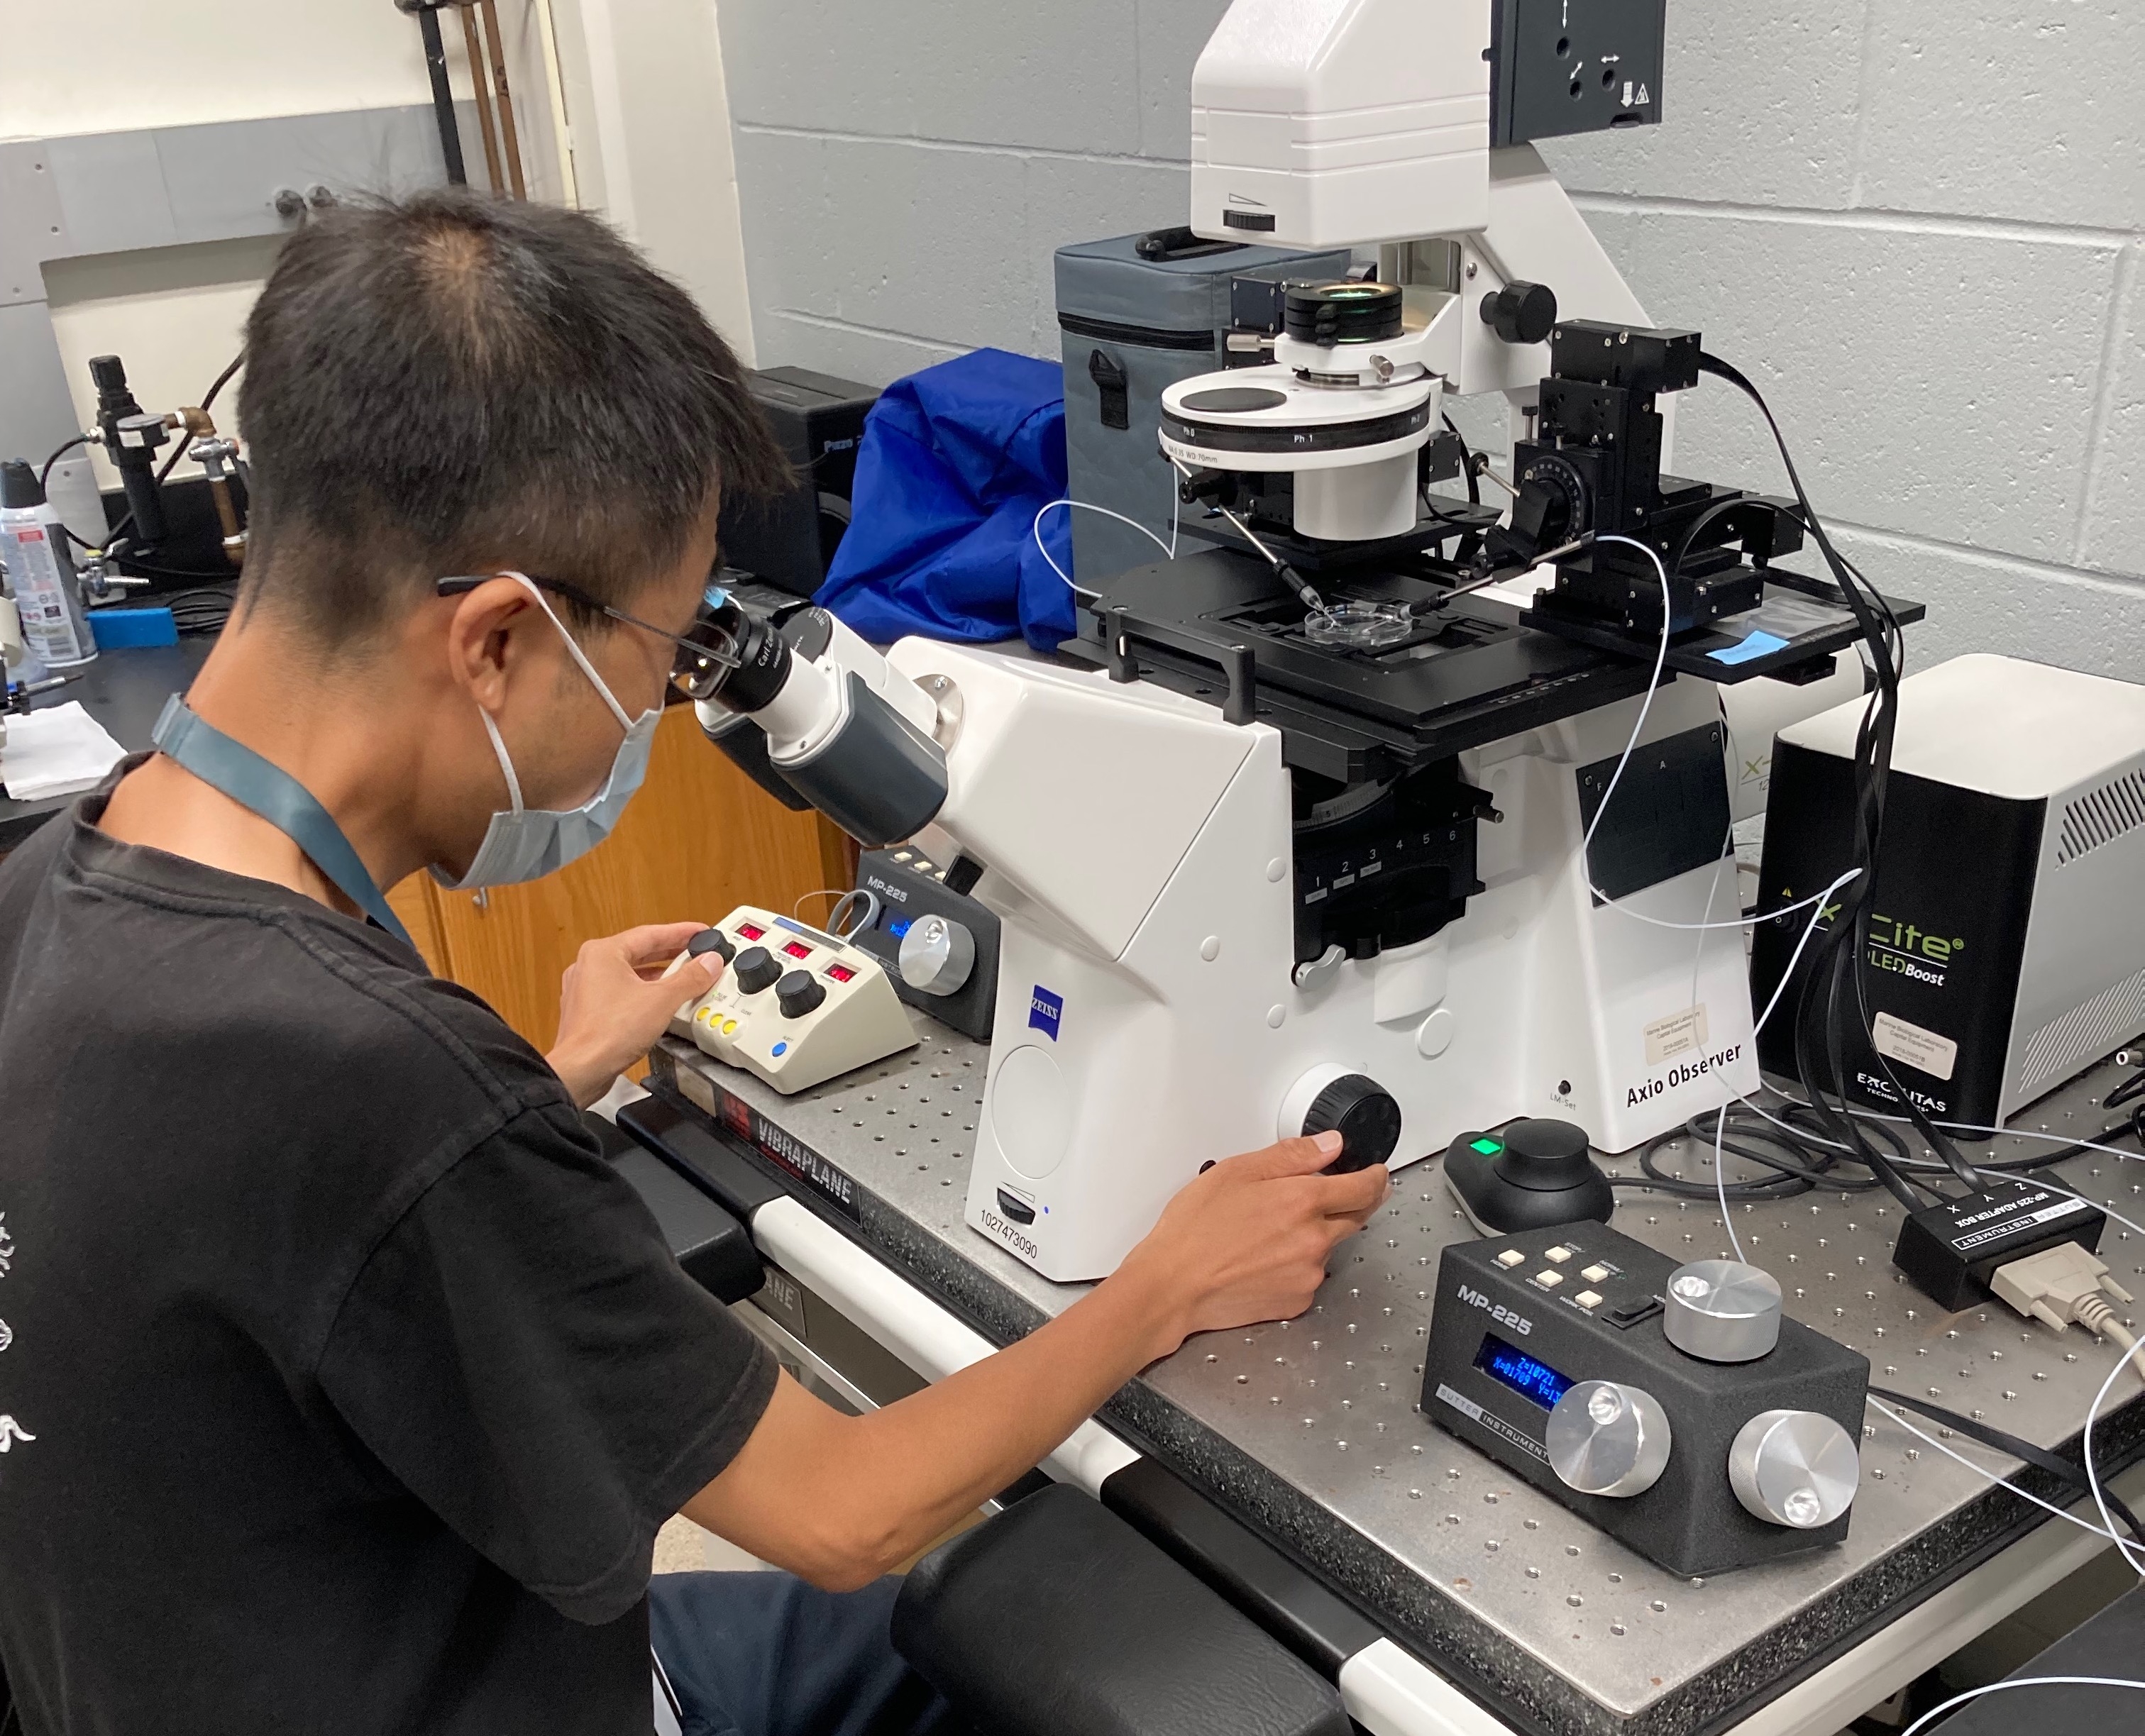 Postdoctoral scientist Hiayang Feng at the MBL’s gene editing facility.  Dr. Feng developed a method to inject rotifers with CRISPR components that was critical to the success of the project. Credit: David Mark Welch